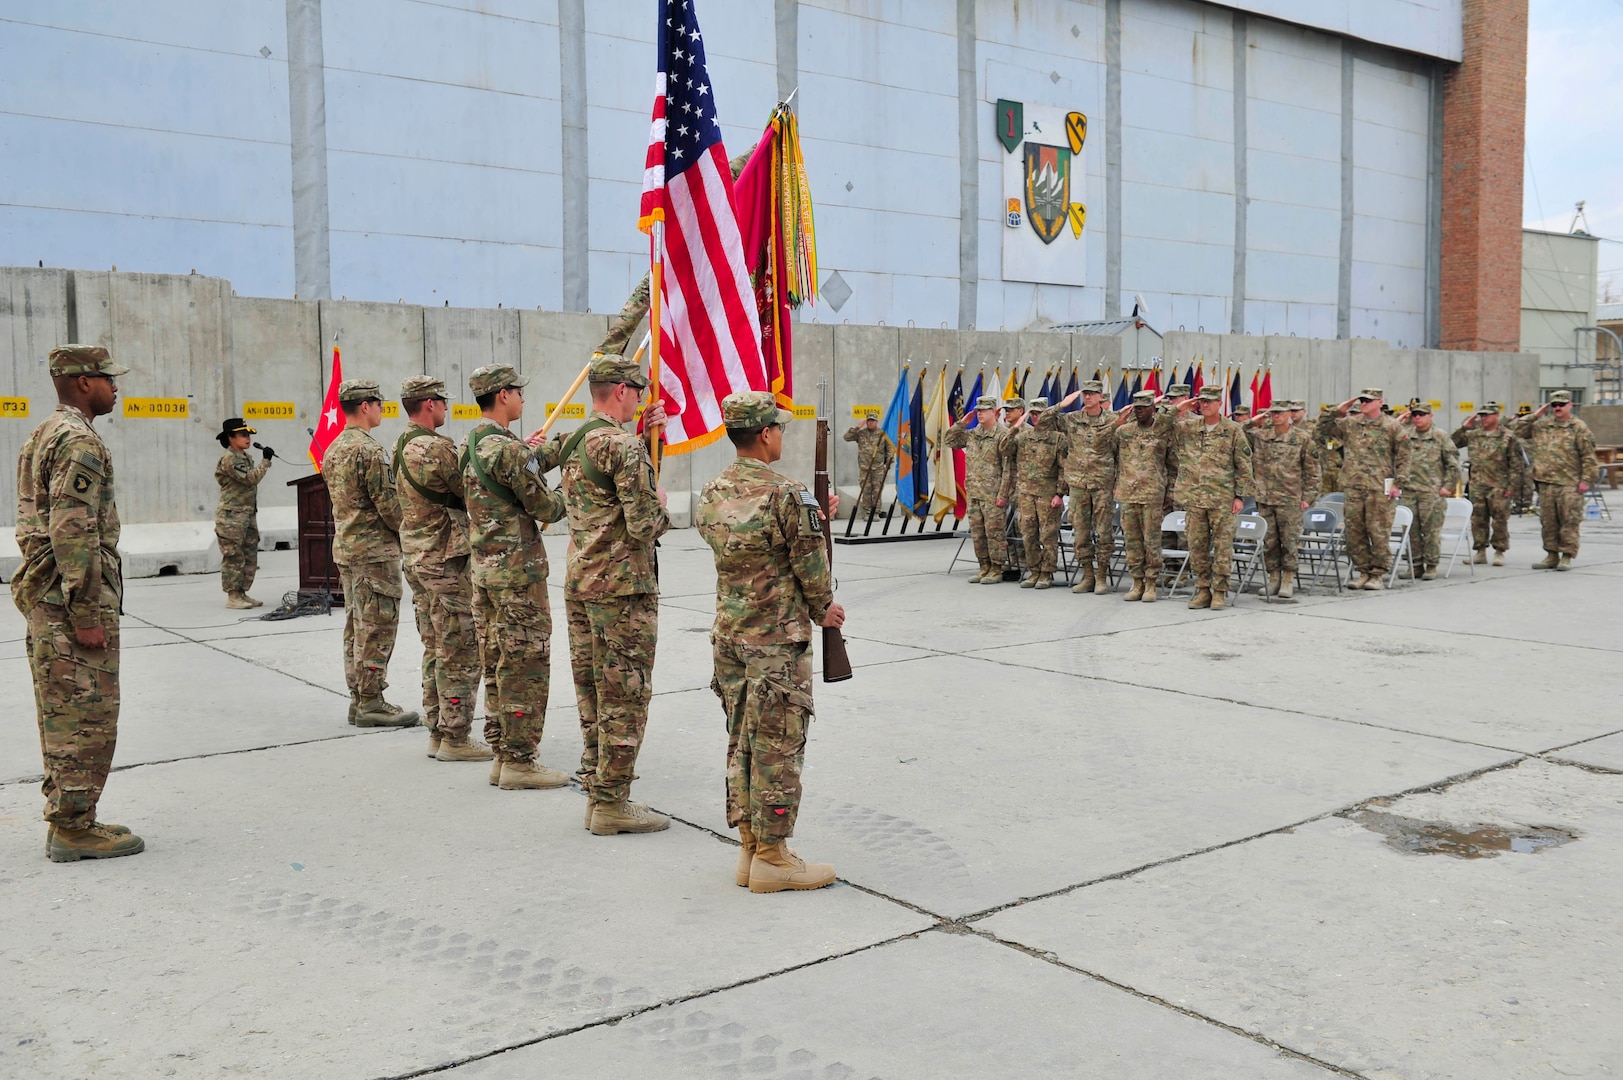 BAGRAM AIRFIELD, AFGHANISTAN (Nov. 29, 2016) - Leaders, Soldiers, and guests render honors to the flag during the playing of the national anthem at the transfer of authority ceremony between the 63rd Ordnance Battalion (Explosive Ordnance Disposal) and the 184th Ord. Bn. (EOD).  Photo by Bob Harrison, U.S. Forces Afghanistan Public Affairs.